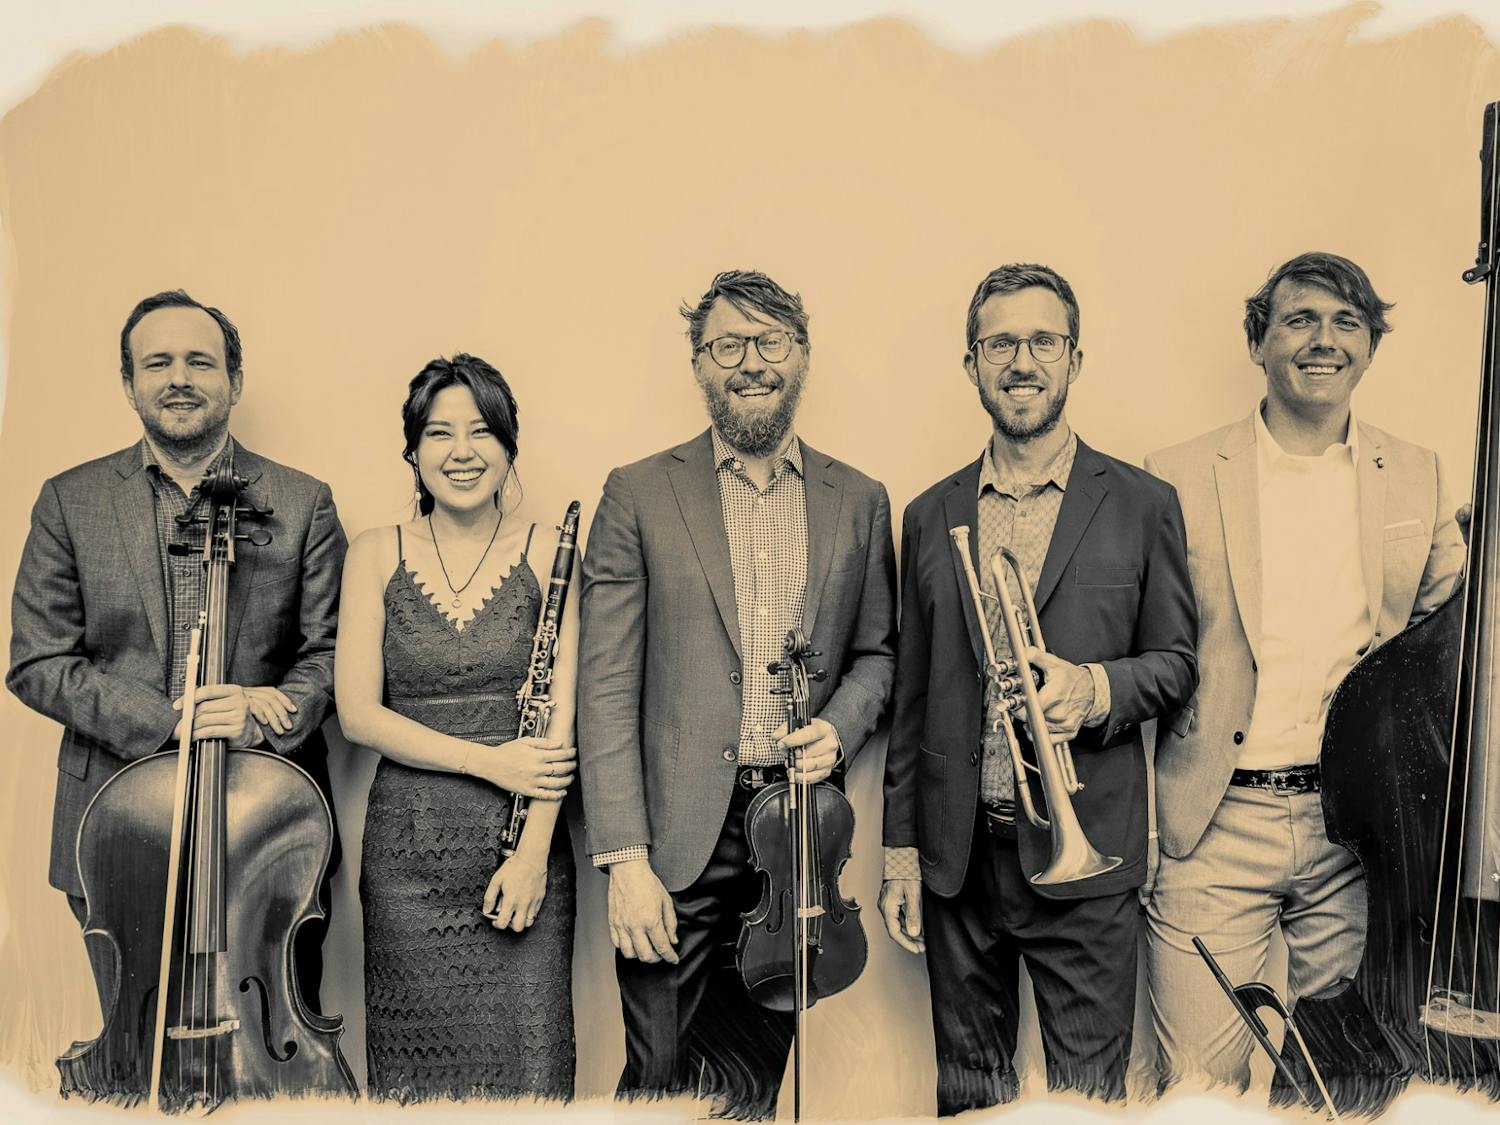 The members of the Founders standing with their instruments. The New York based group operates out of USC's music school and intend to bring their 'non-standardized instrumentation' to the Southern Exposure New Music Series.